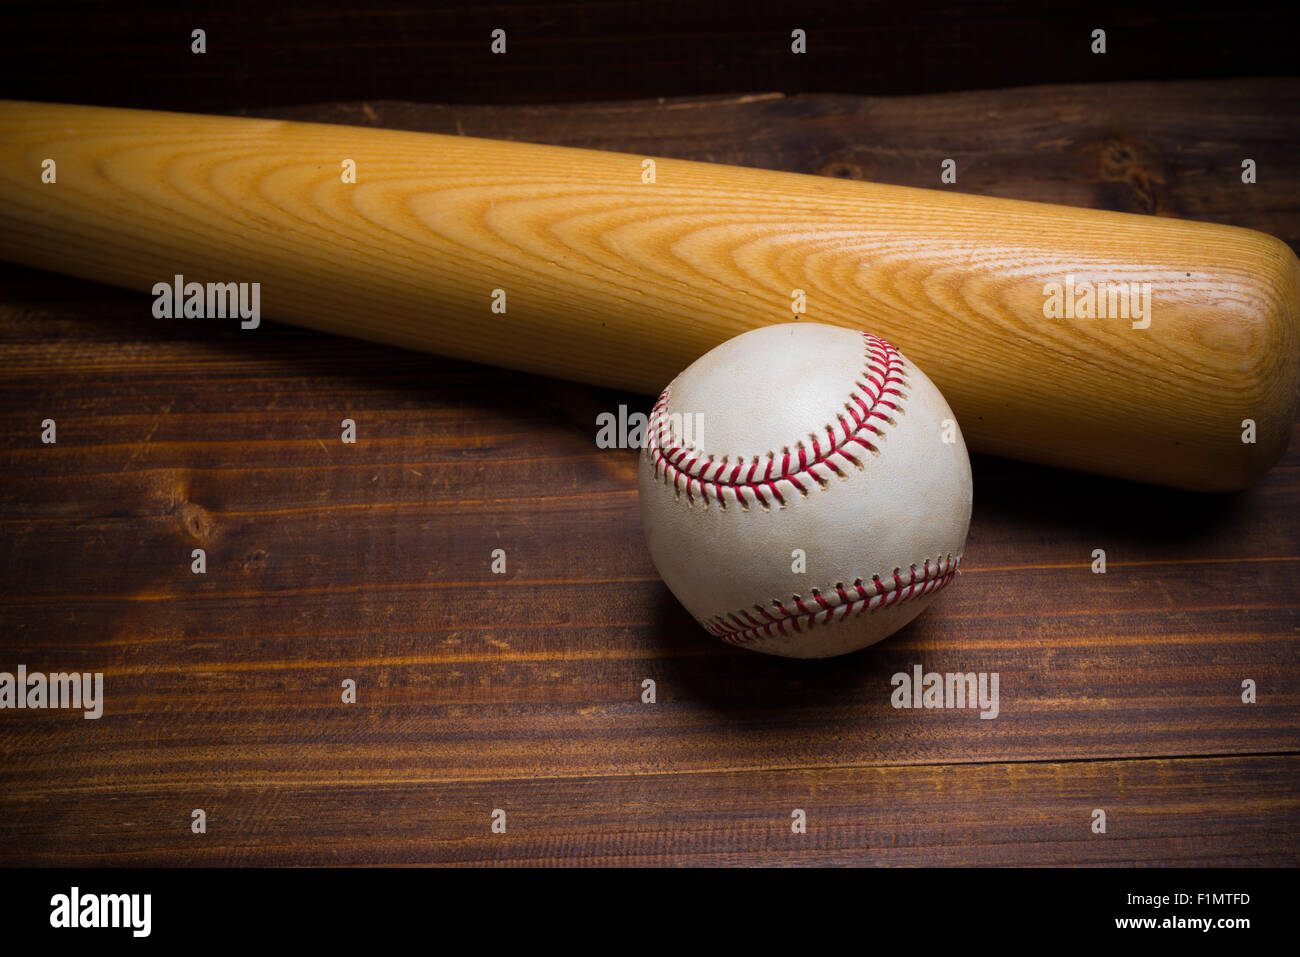 Baseball equipment: wooden bat and ball on a wood plank or bench background Stock Photo